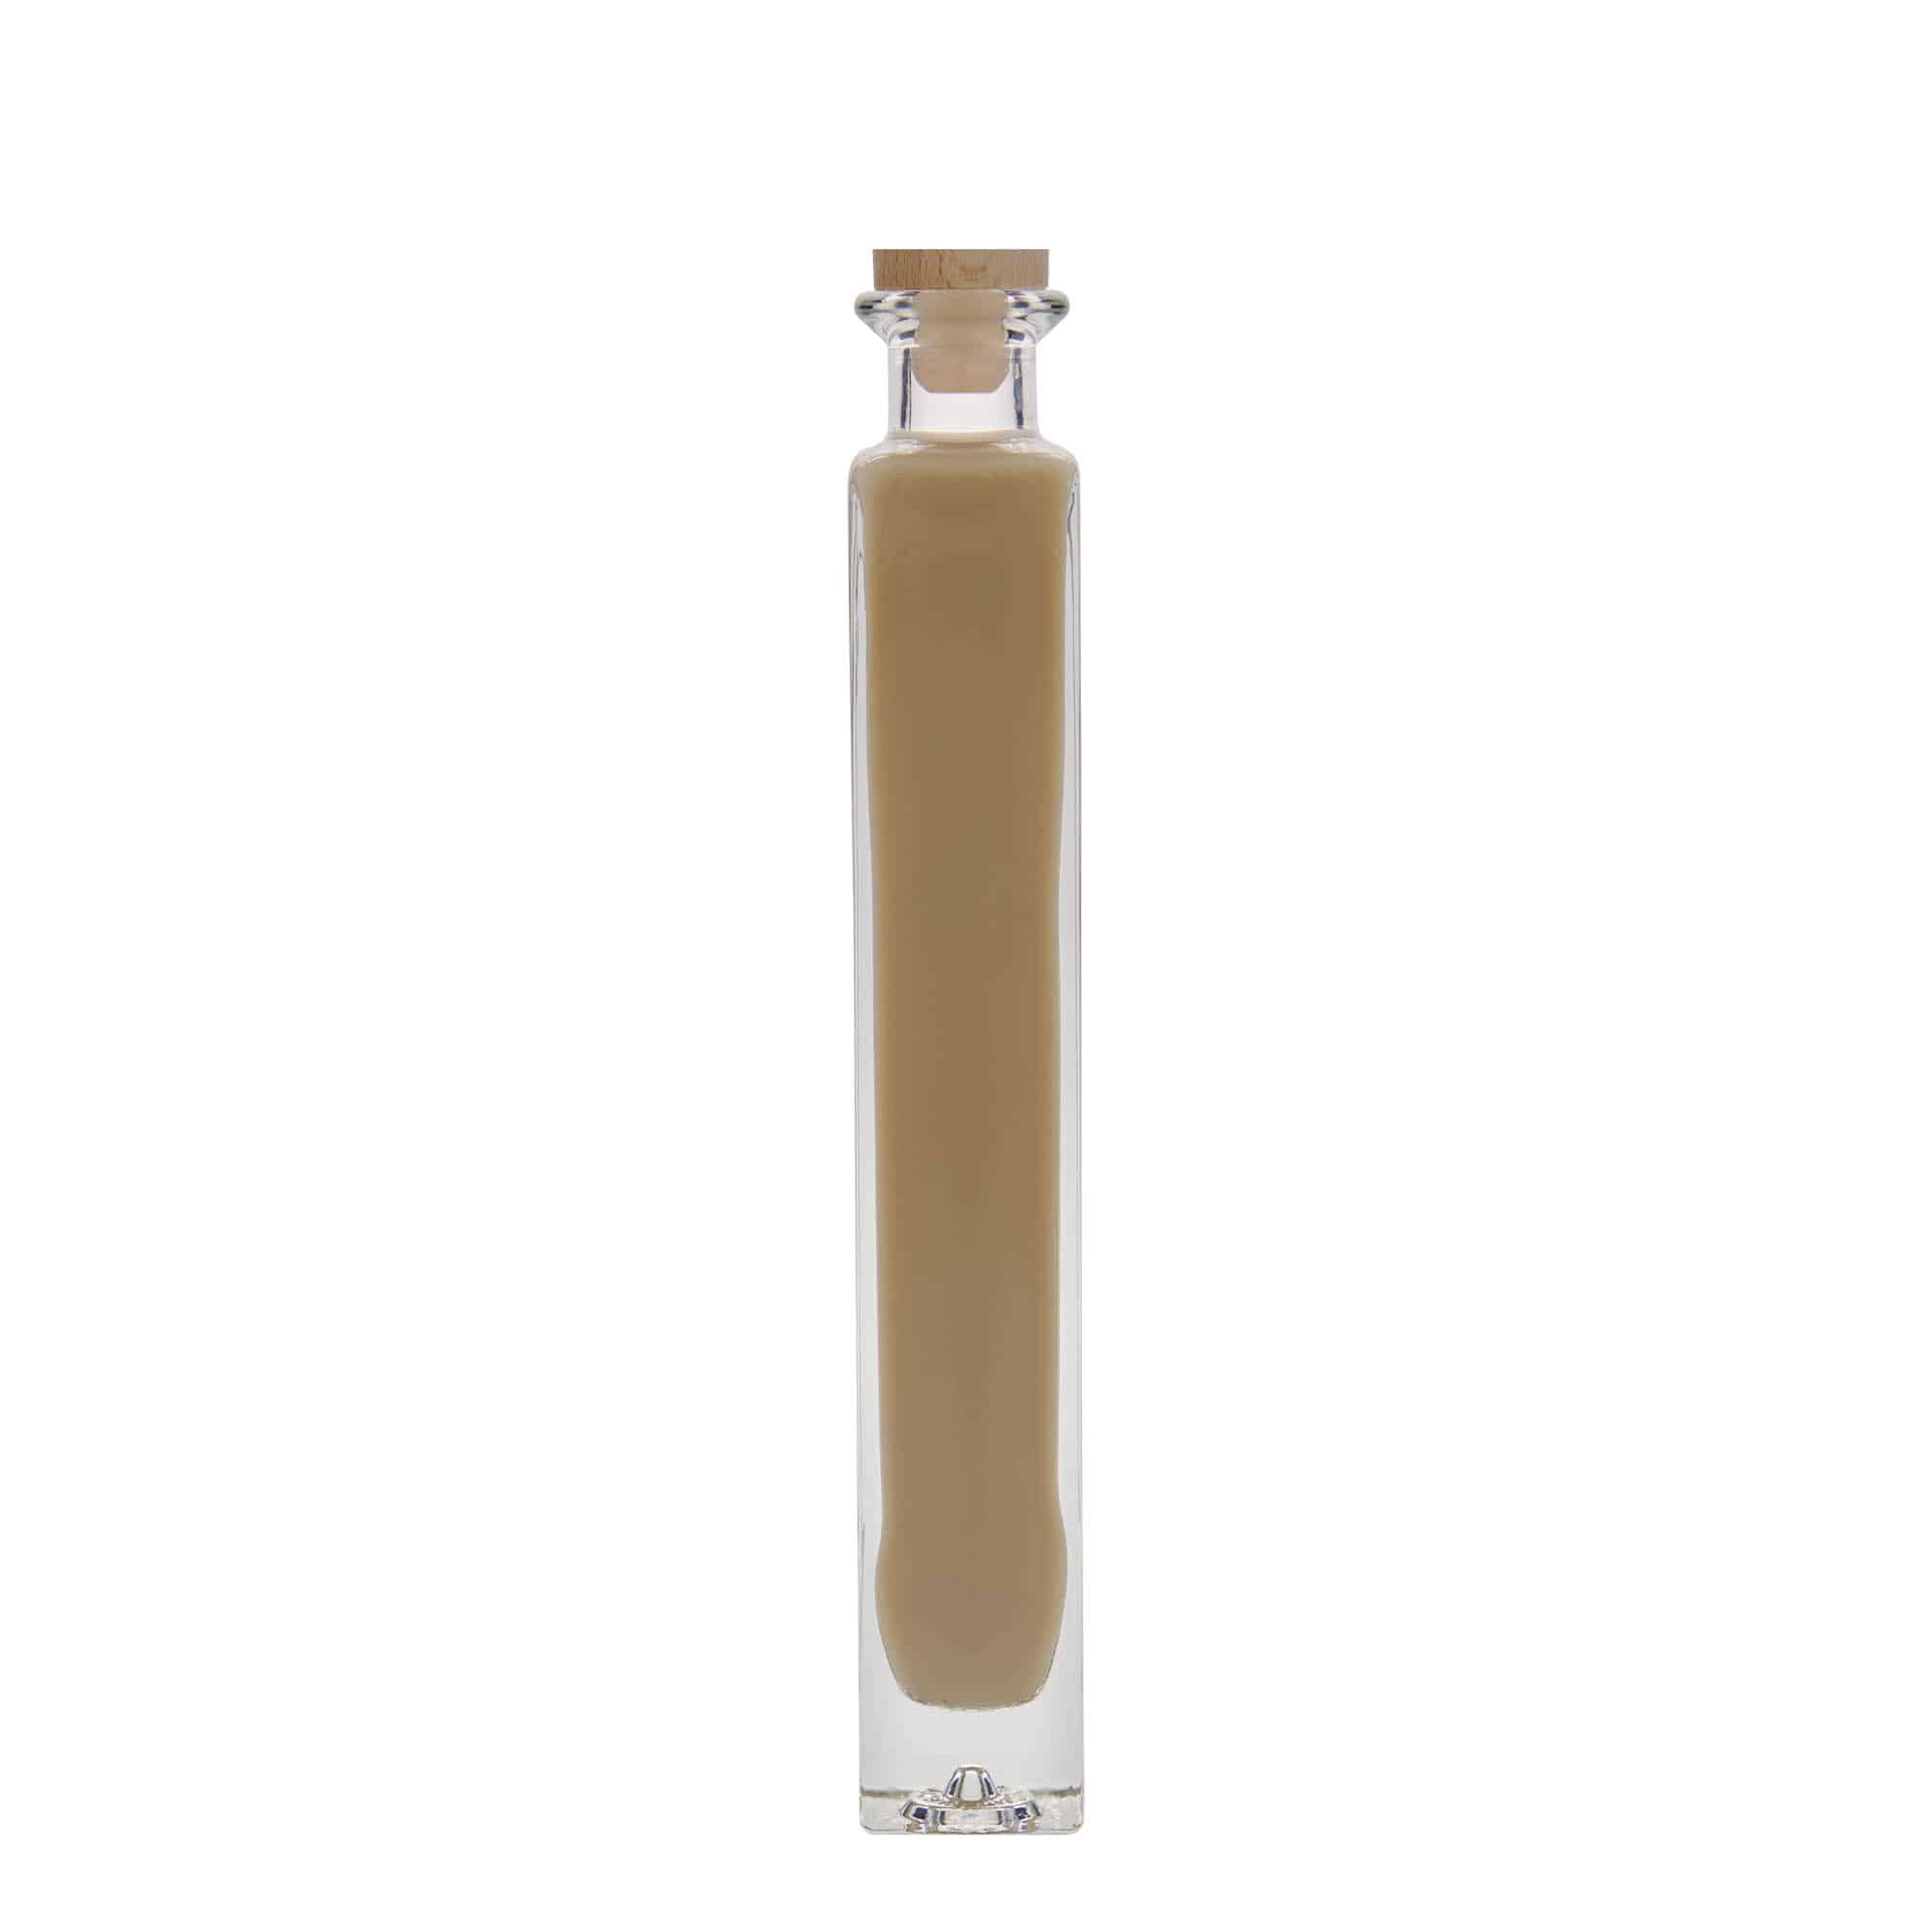 200 ml glass bottle 'Tommy', square, closure: cork